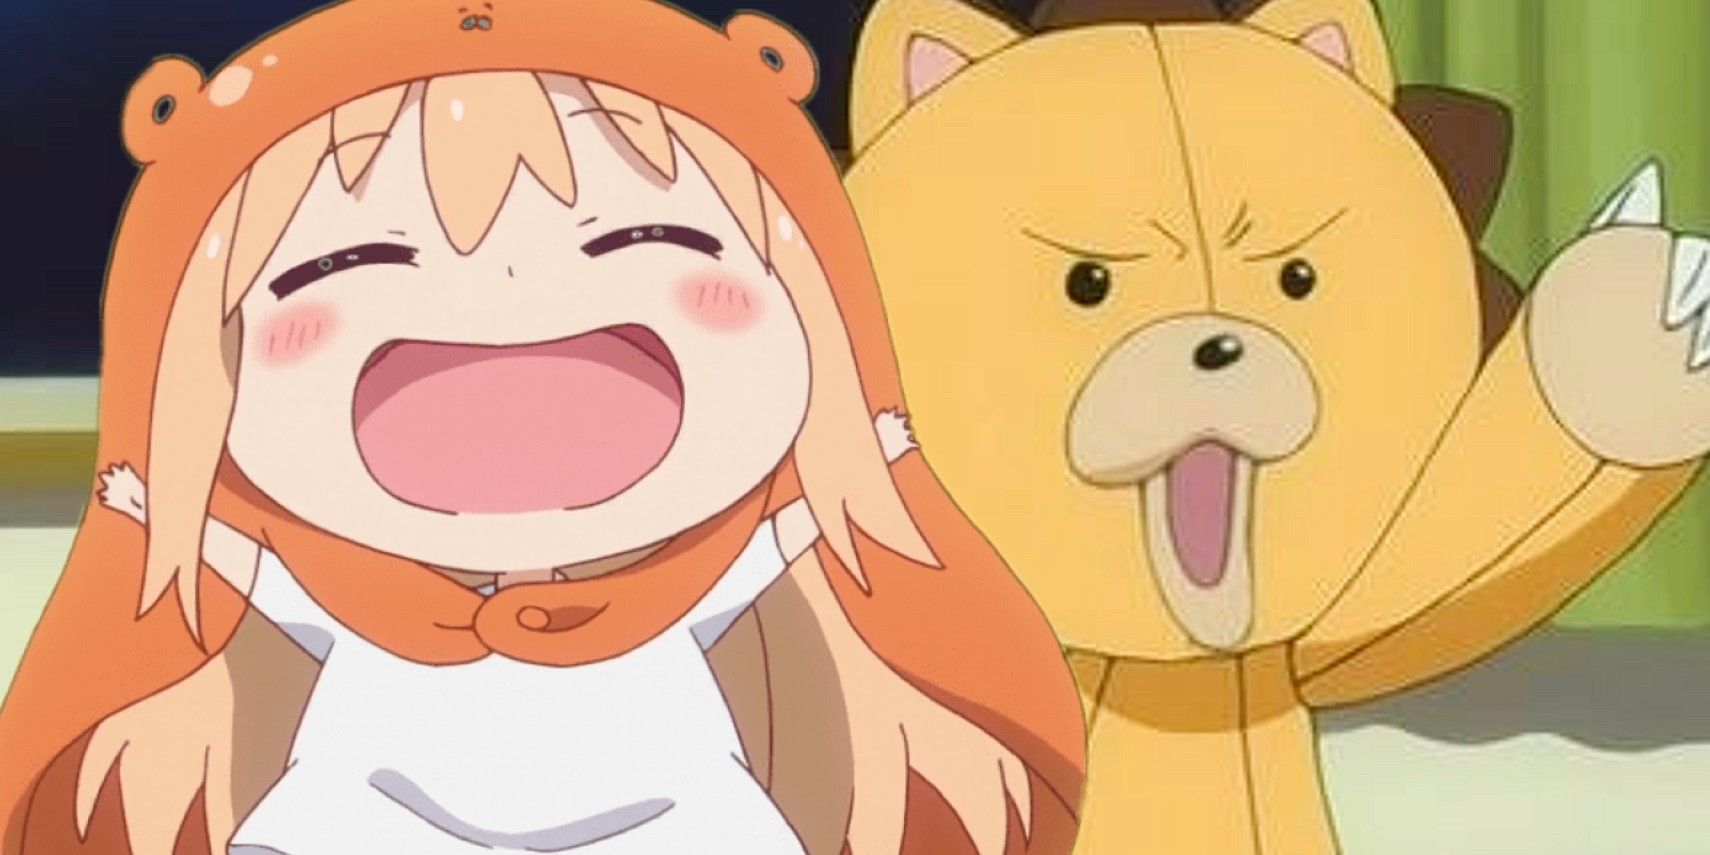 Adorable Anime Mascots That Are Extremely Powerful